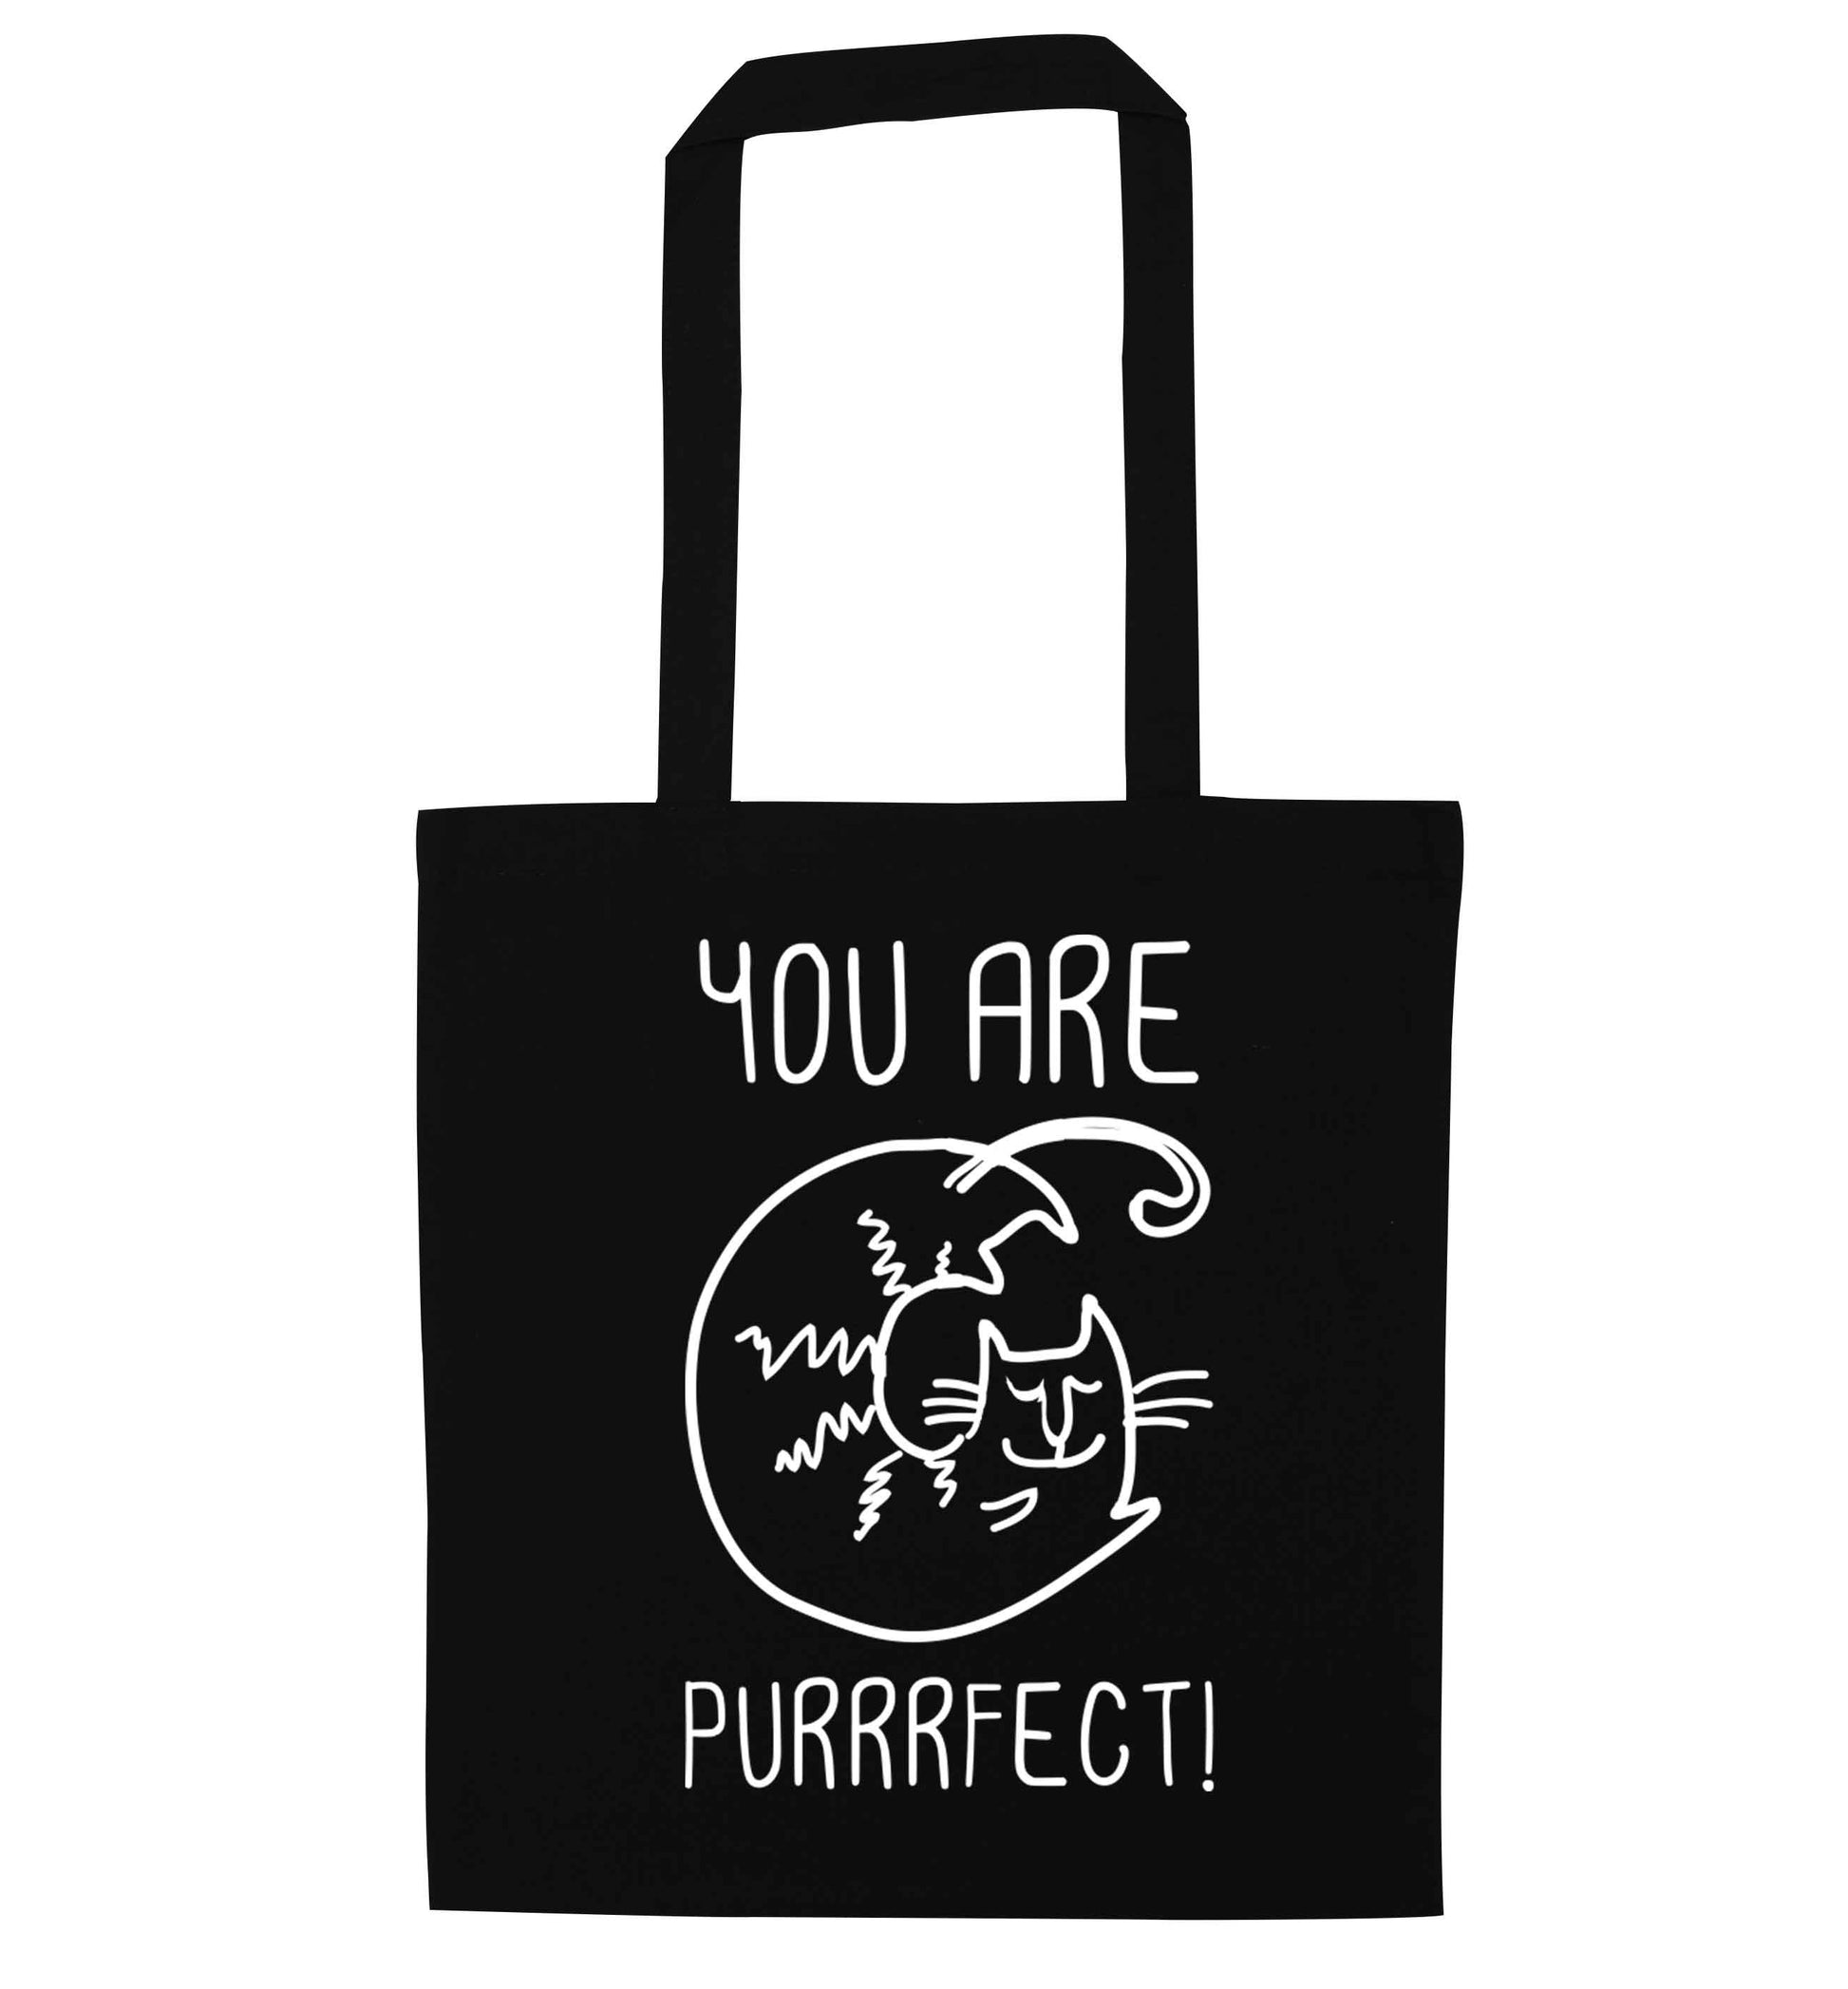 You are purrfect black tote bag